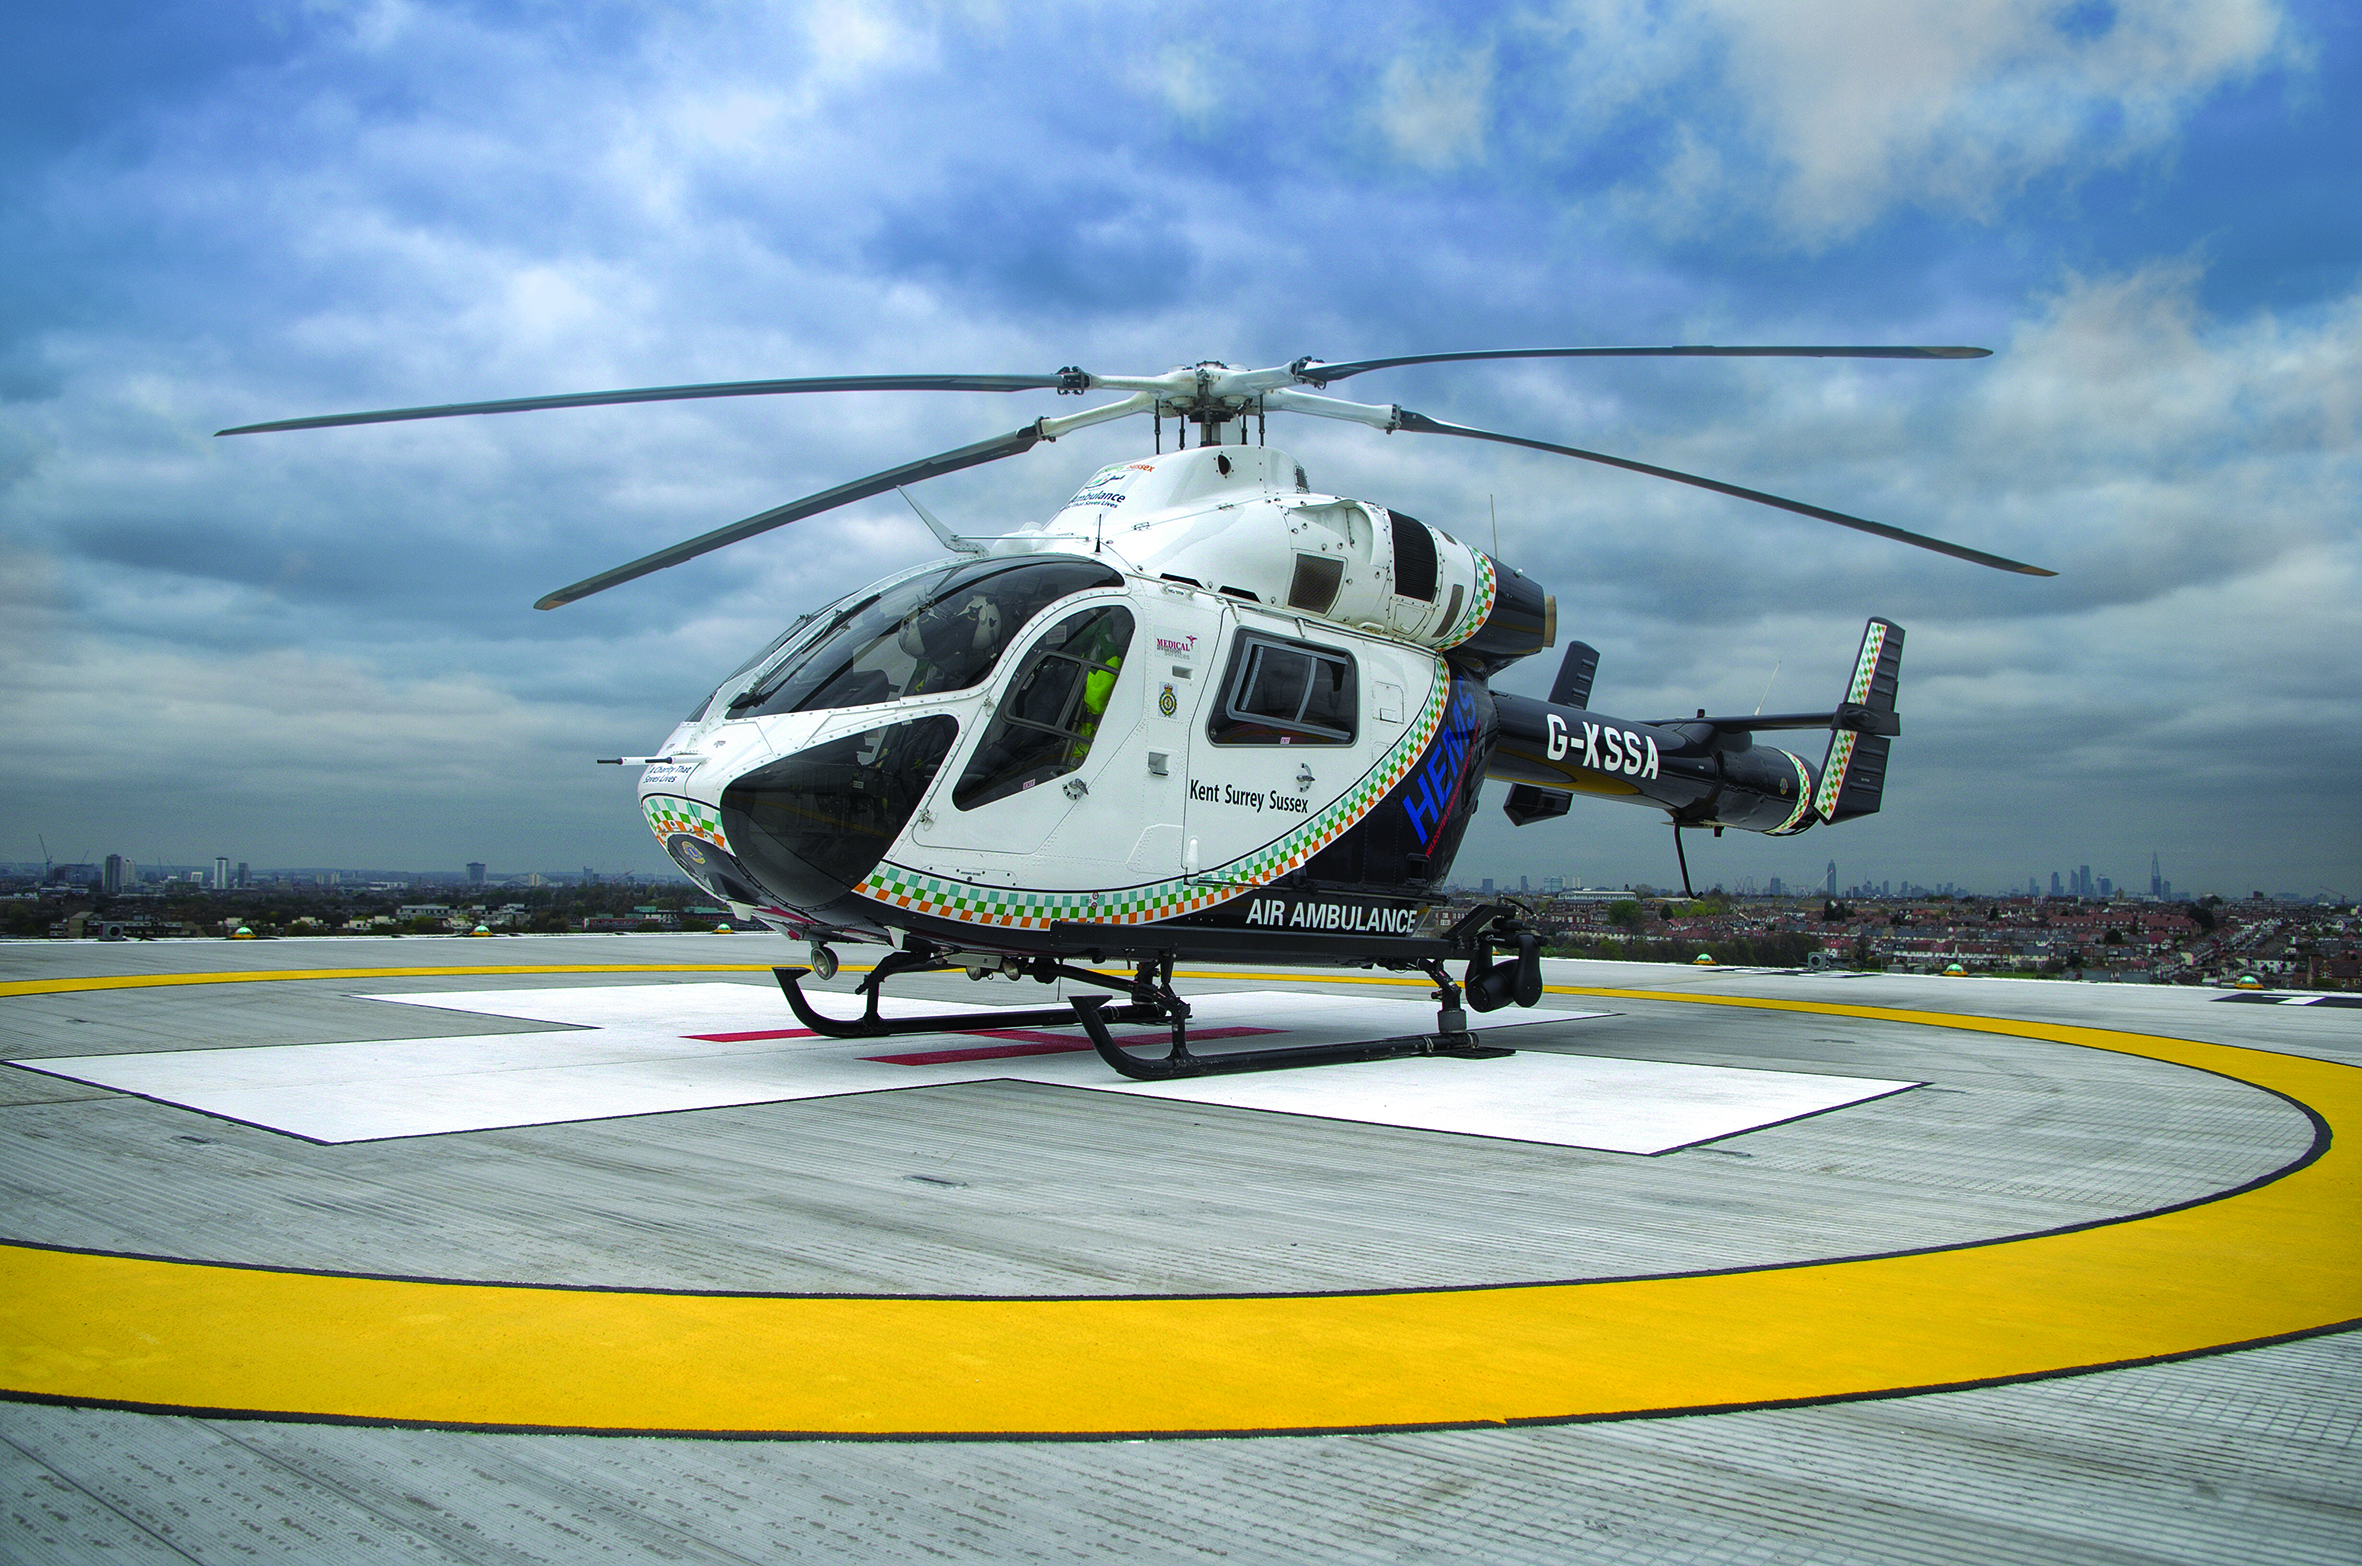 1,800 Missions flown into St George’s helipad in eight years